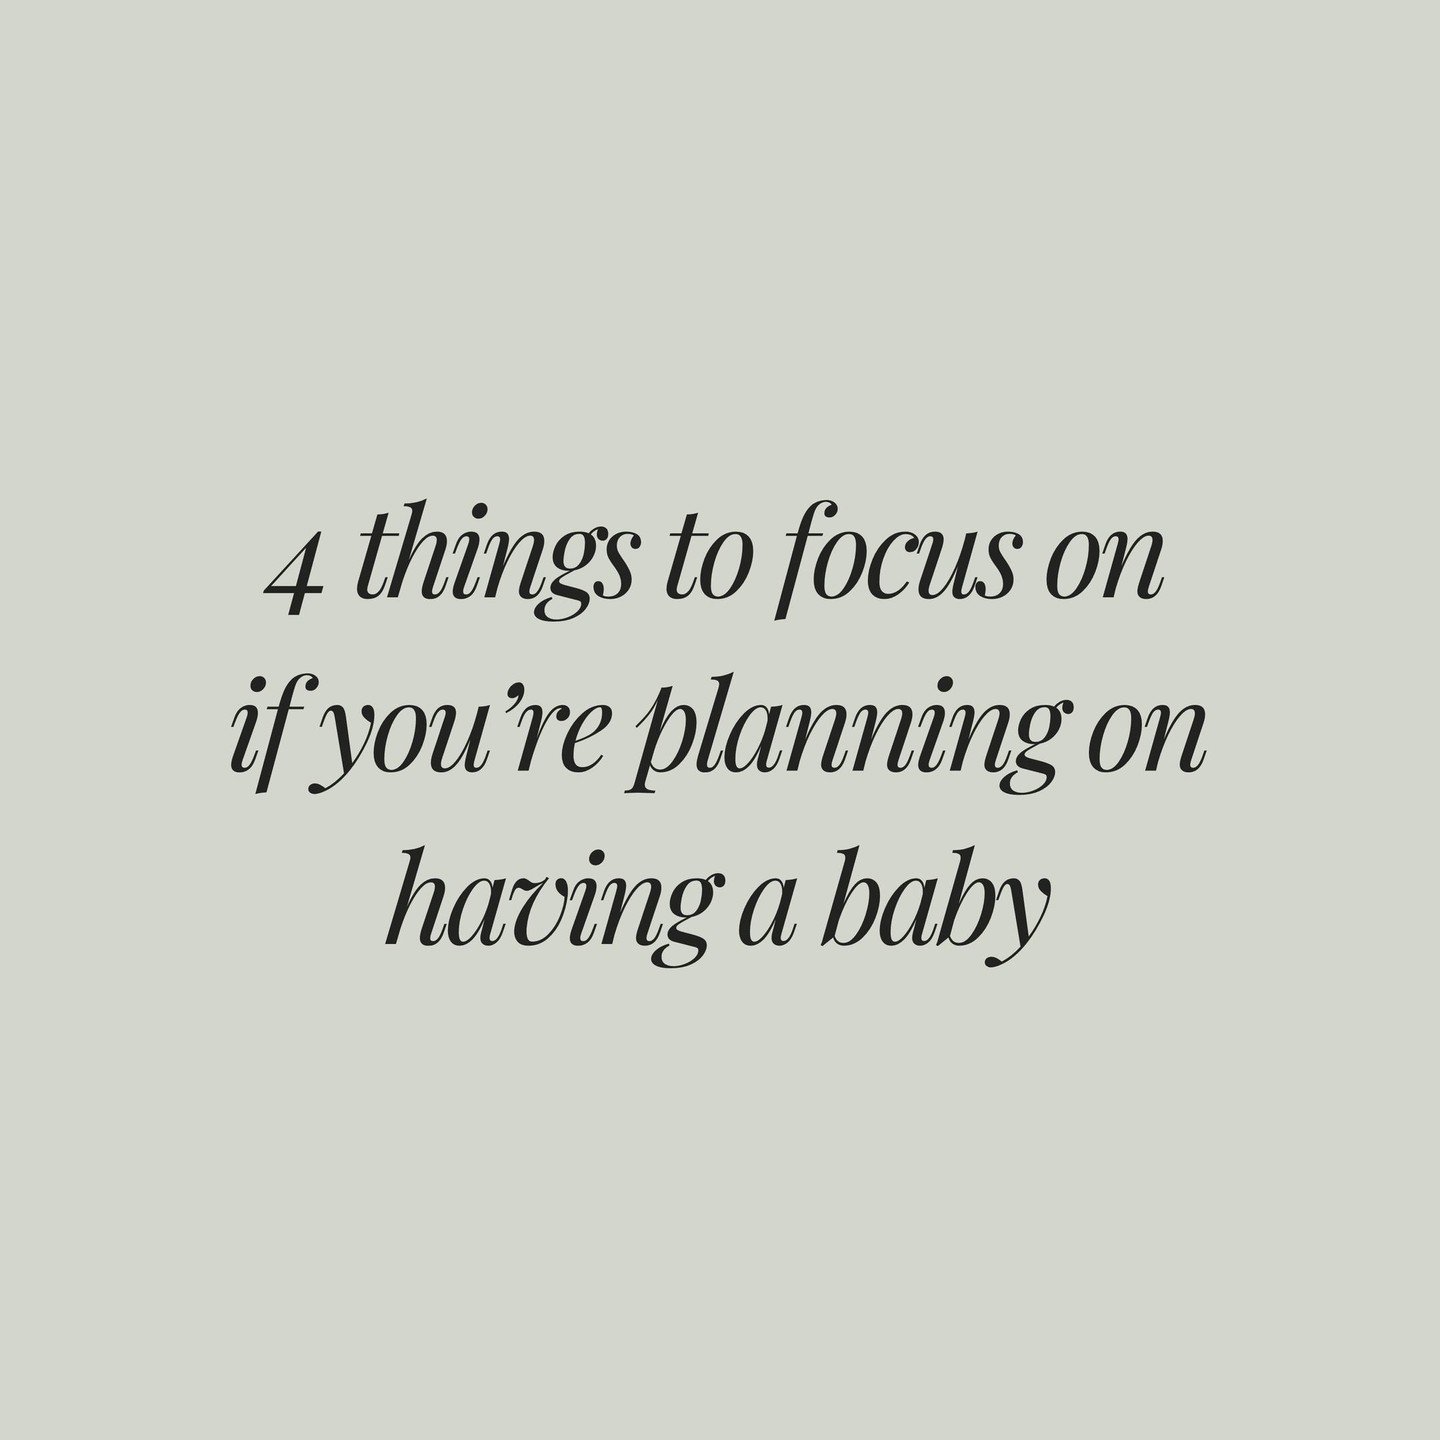 Planning on having a baby? Here's are some key things to focus on from a Naturopathic and nutritional perspective.⁠
⁠
For optimal preconception care, aim to implement these changes at least 6 months before conception, if possible. ⁠
⁠
1. Book in for 